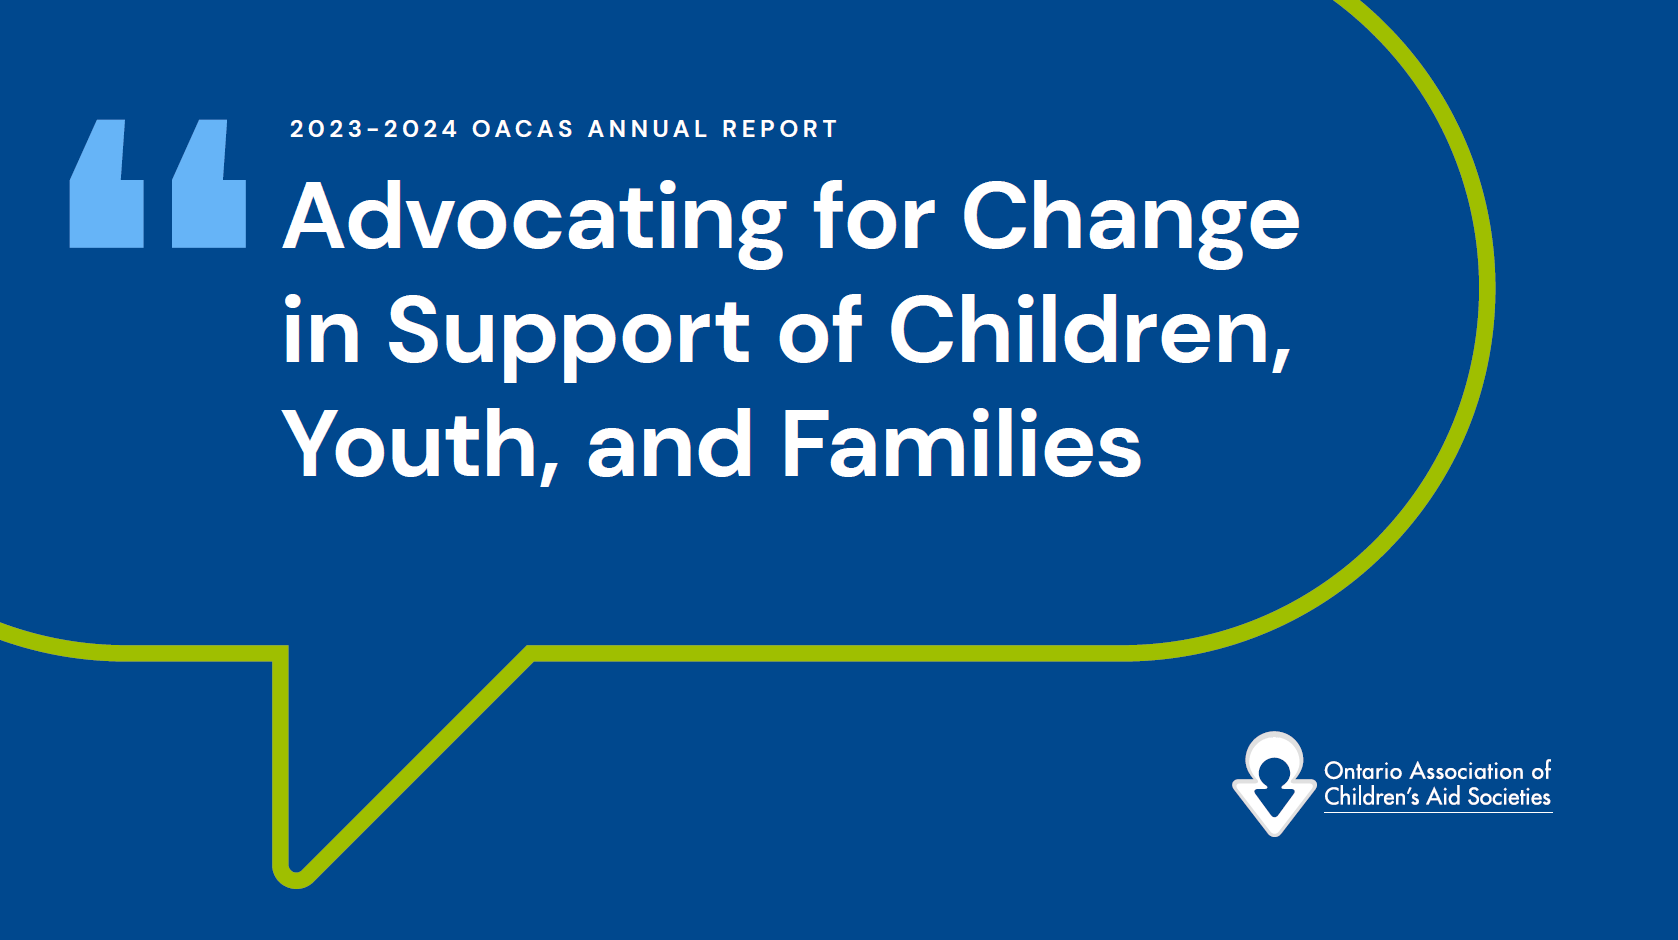 OACAS Releases 2023-2024 Annual Report: Advocating for Change in Support of Children, Youth, and Families